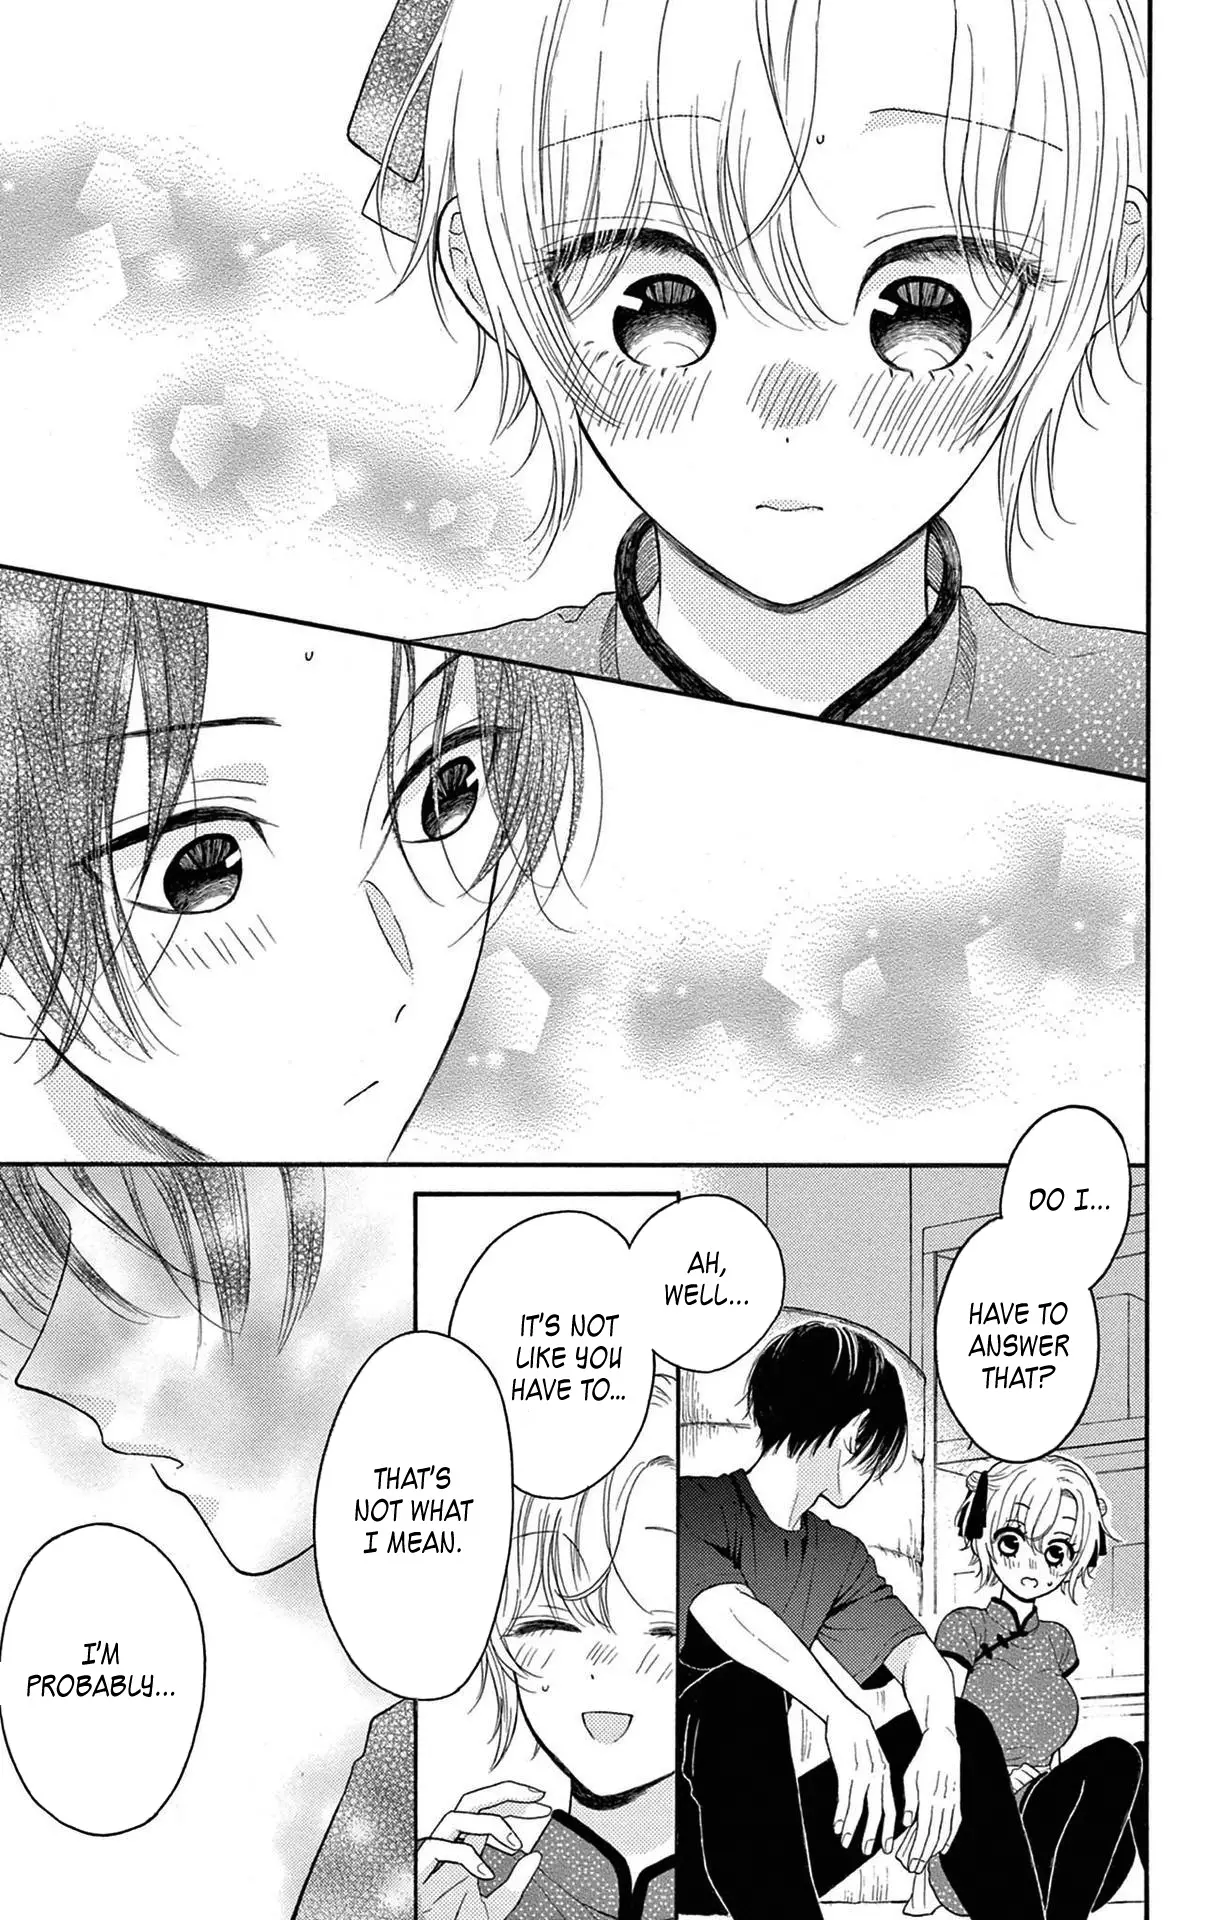 Mikazuki Mao Can't Choose A Gender - 9 page 20-51cee19c